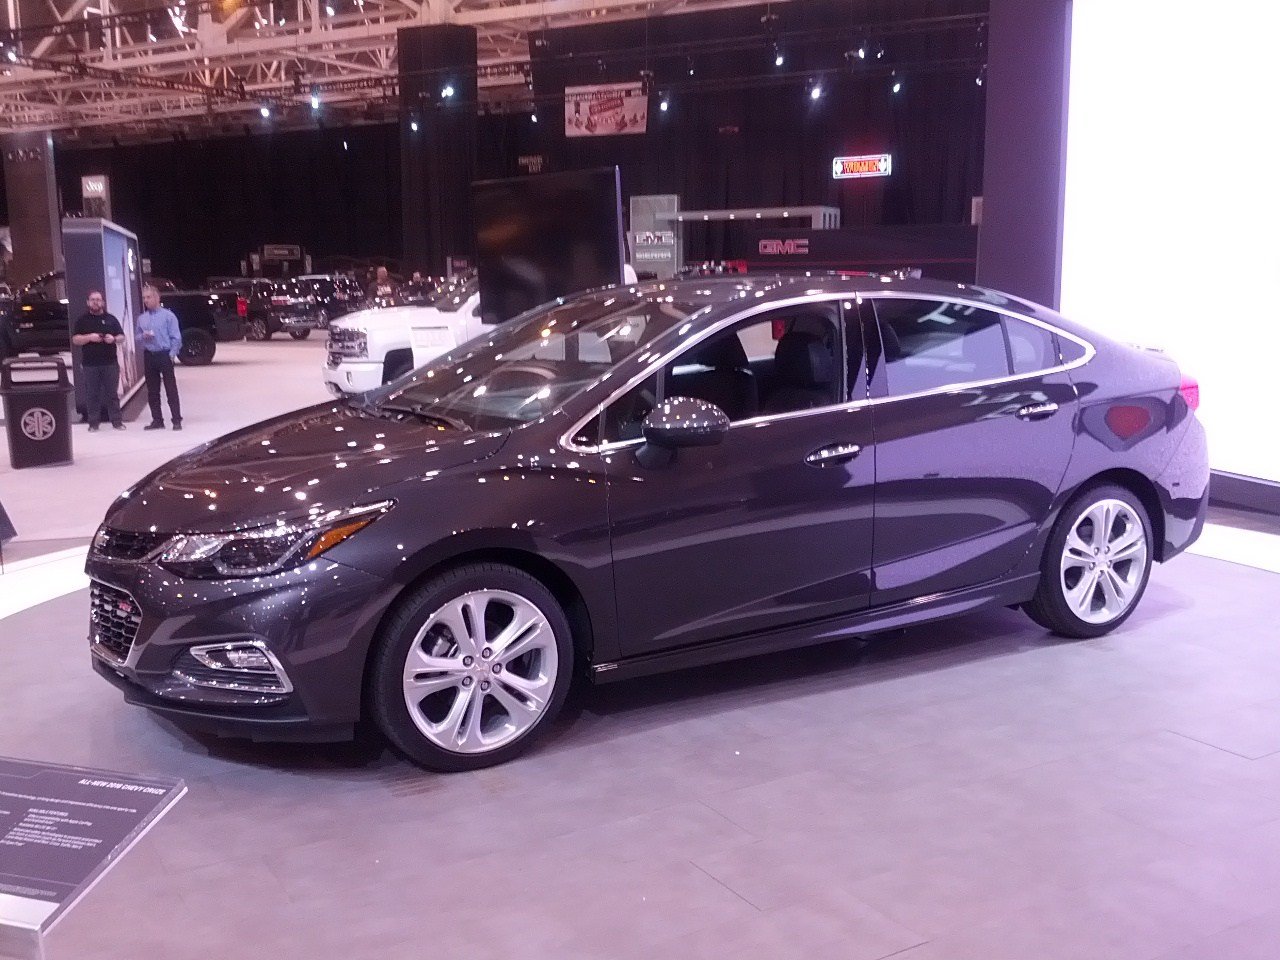 GM features Cruze at Cleveland Auto Show